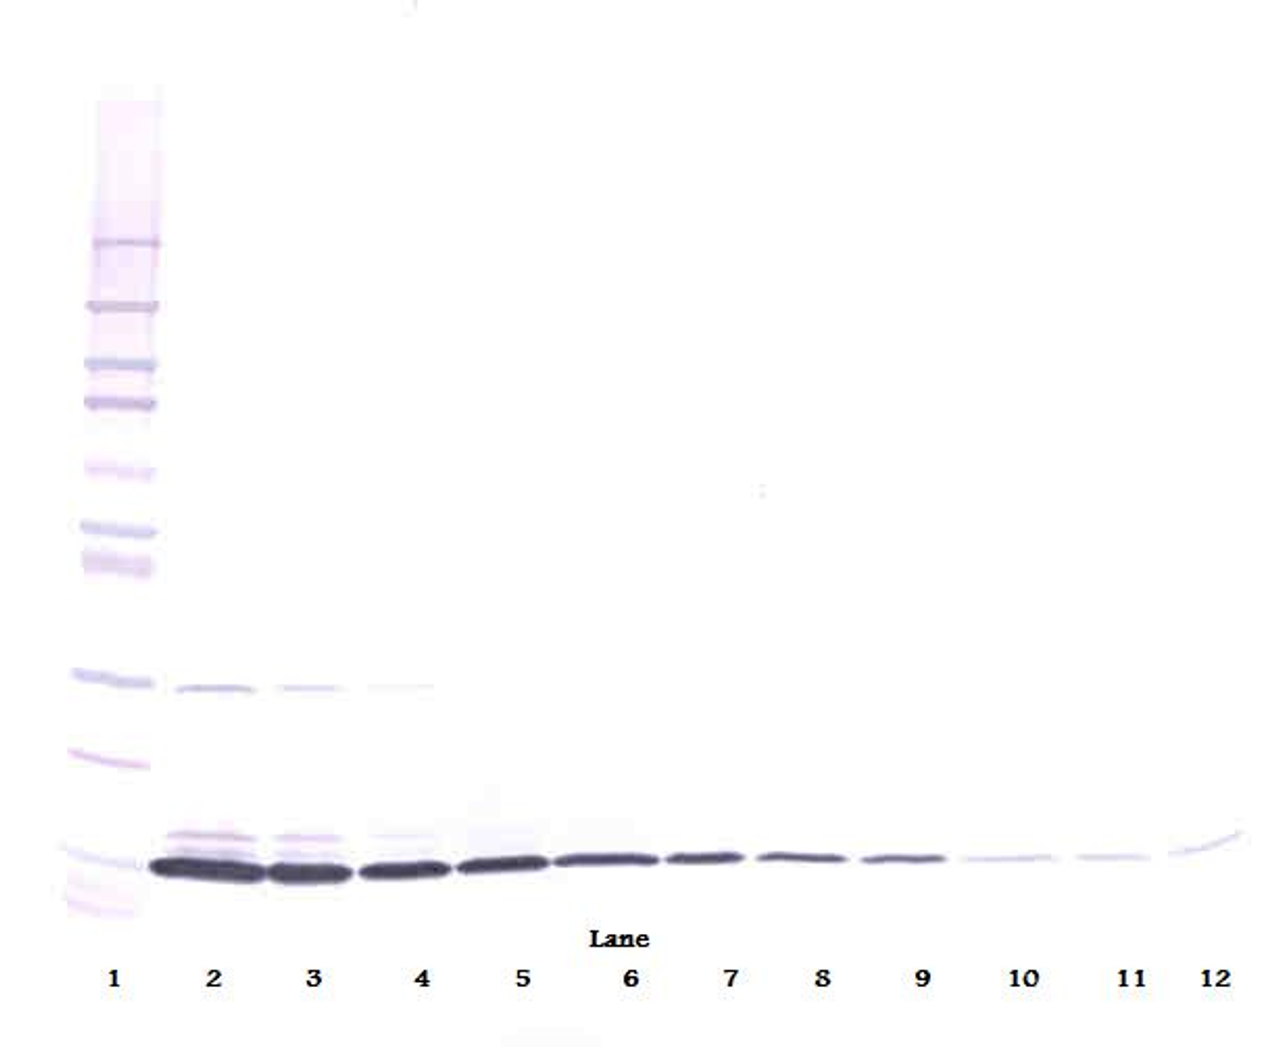 To detect Rat IL-3-beta by Western Blot analysis this antibody can be used at a concentration of 0.1 - 0.2 ug/ml. Used in conjunction with compatible secondary reagents the detection limit for recombinant Rat IL-3-beta is 1.5 - 3.0 ng/lane, under either reducing or non-reducing conditions.